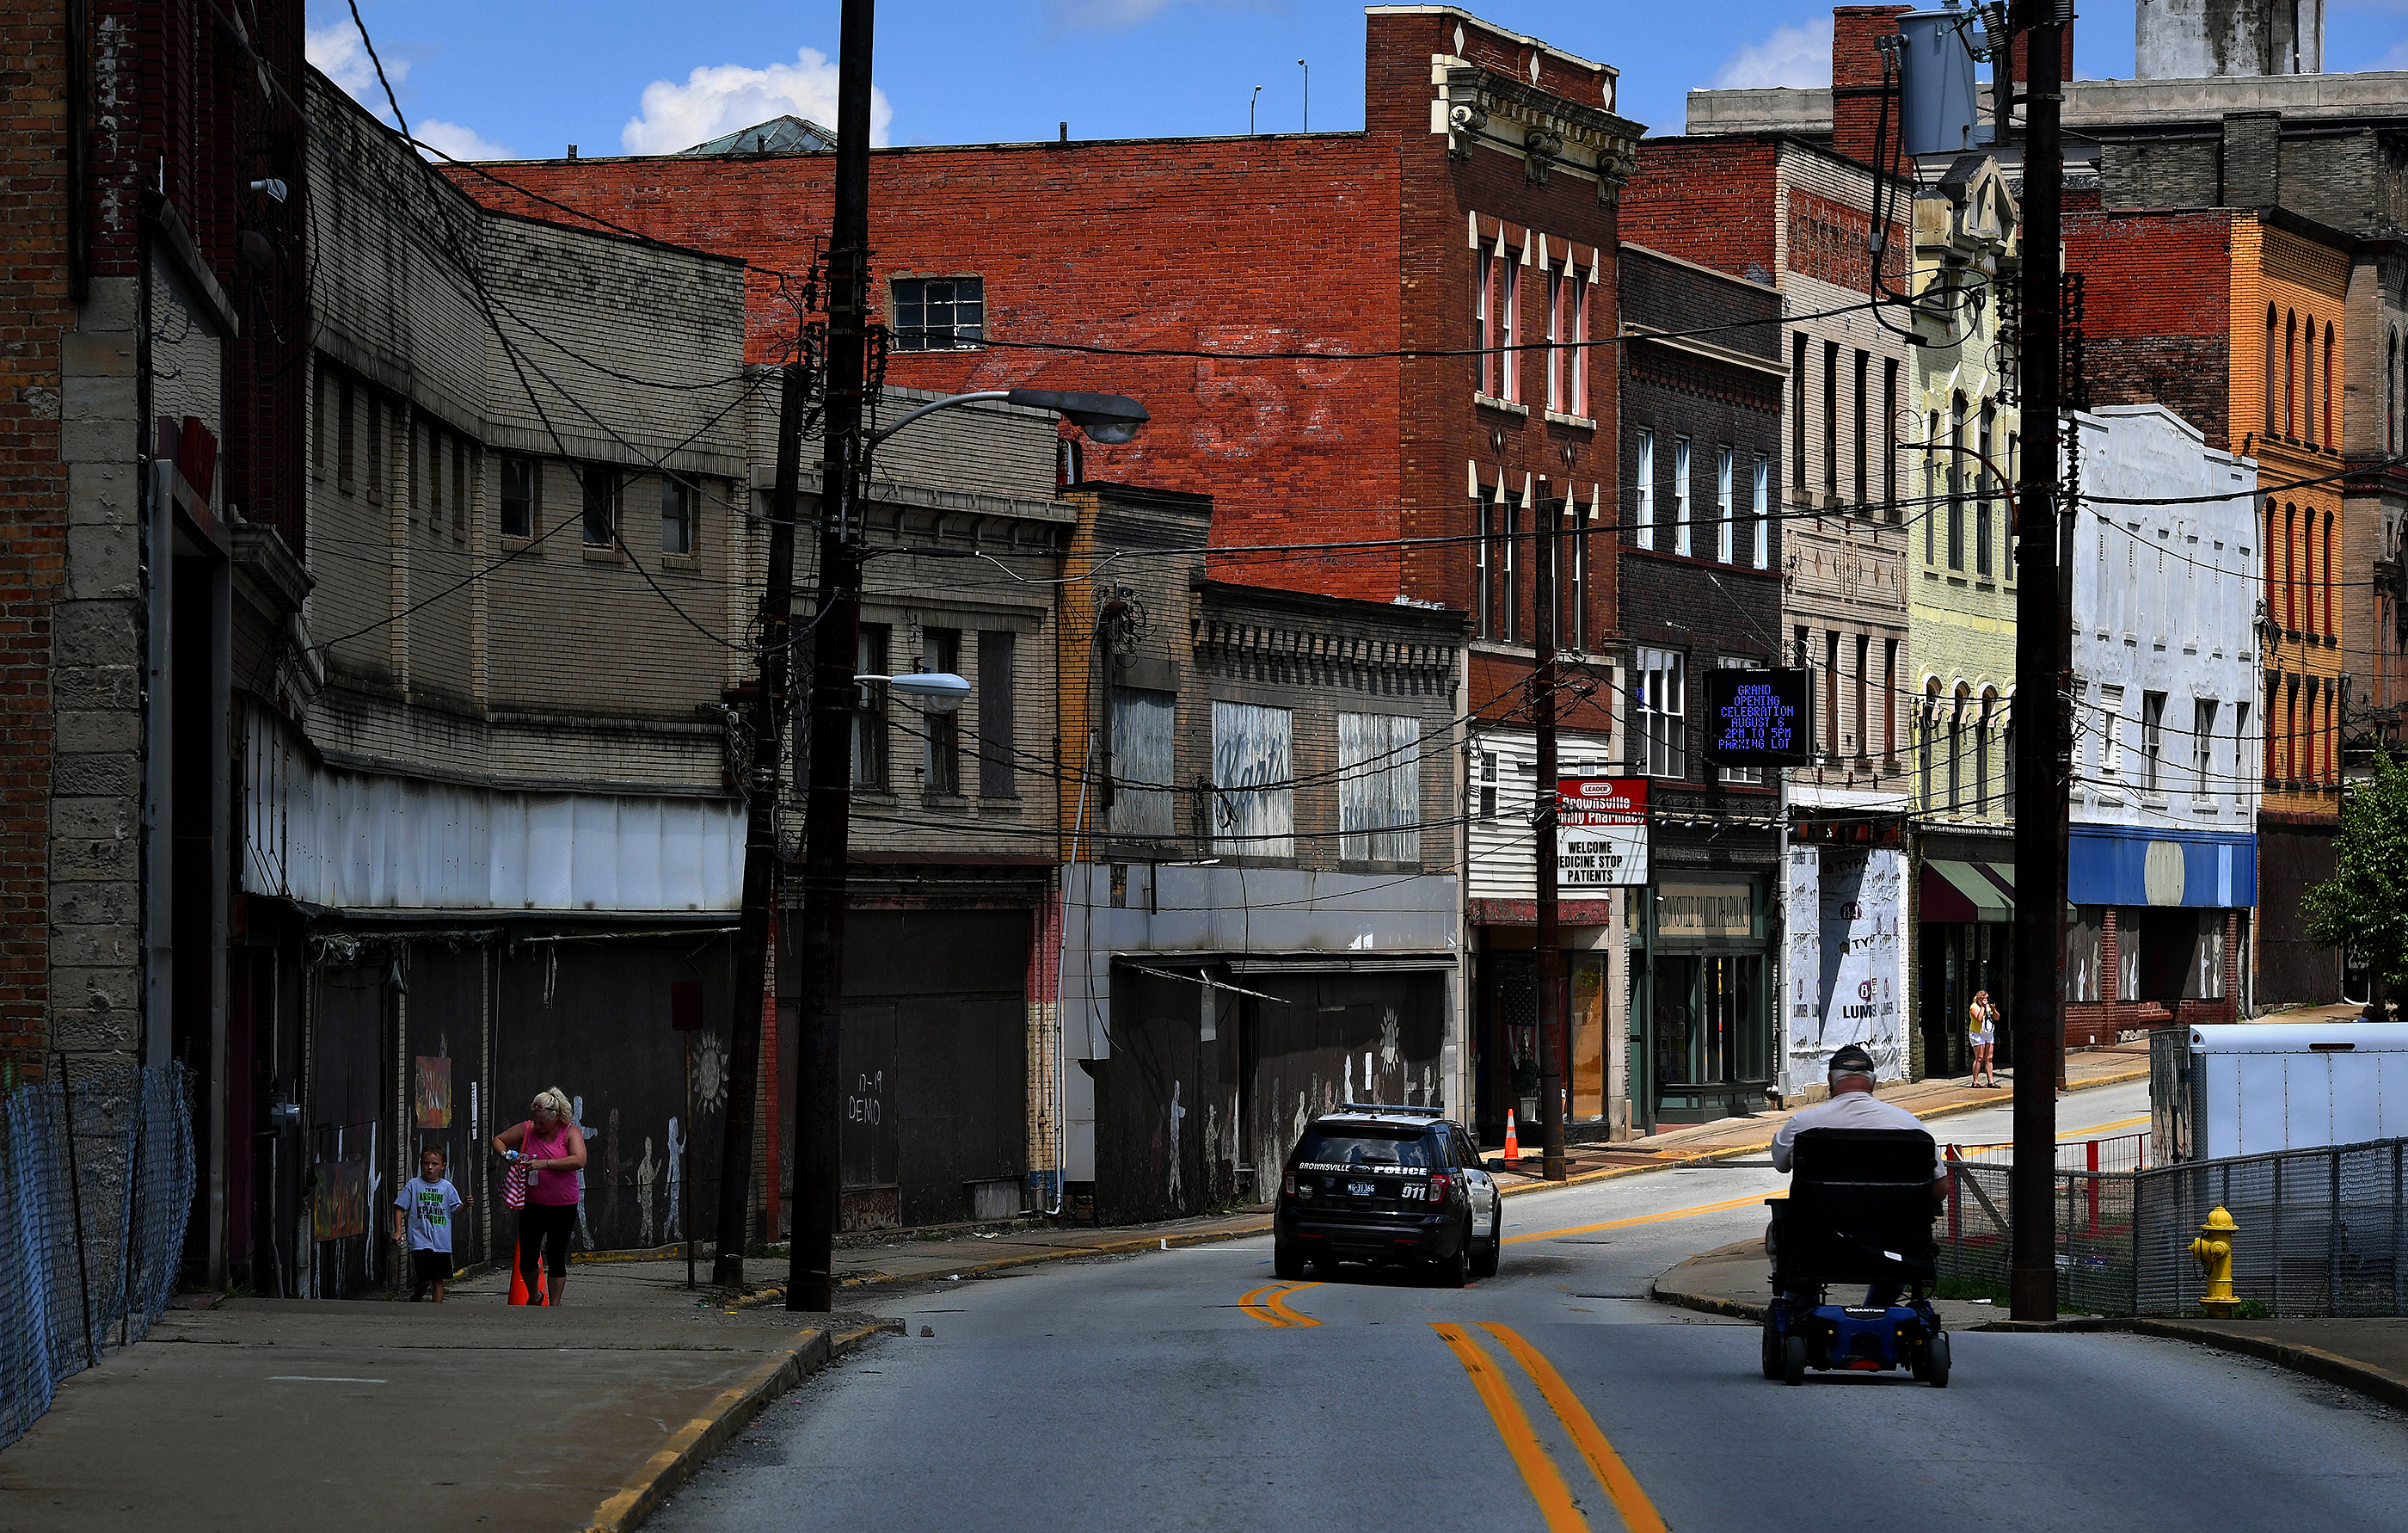 Many abandoned buildings and shuttered businesses in Brownsville, Pennsylvania, one of 26 states with an increasing mortality rate among whites.
